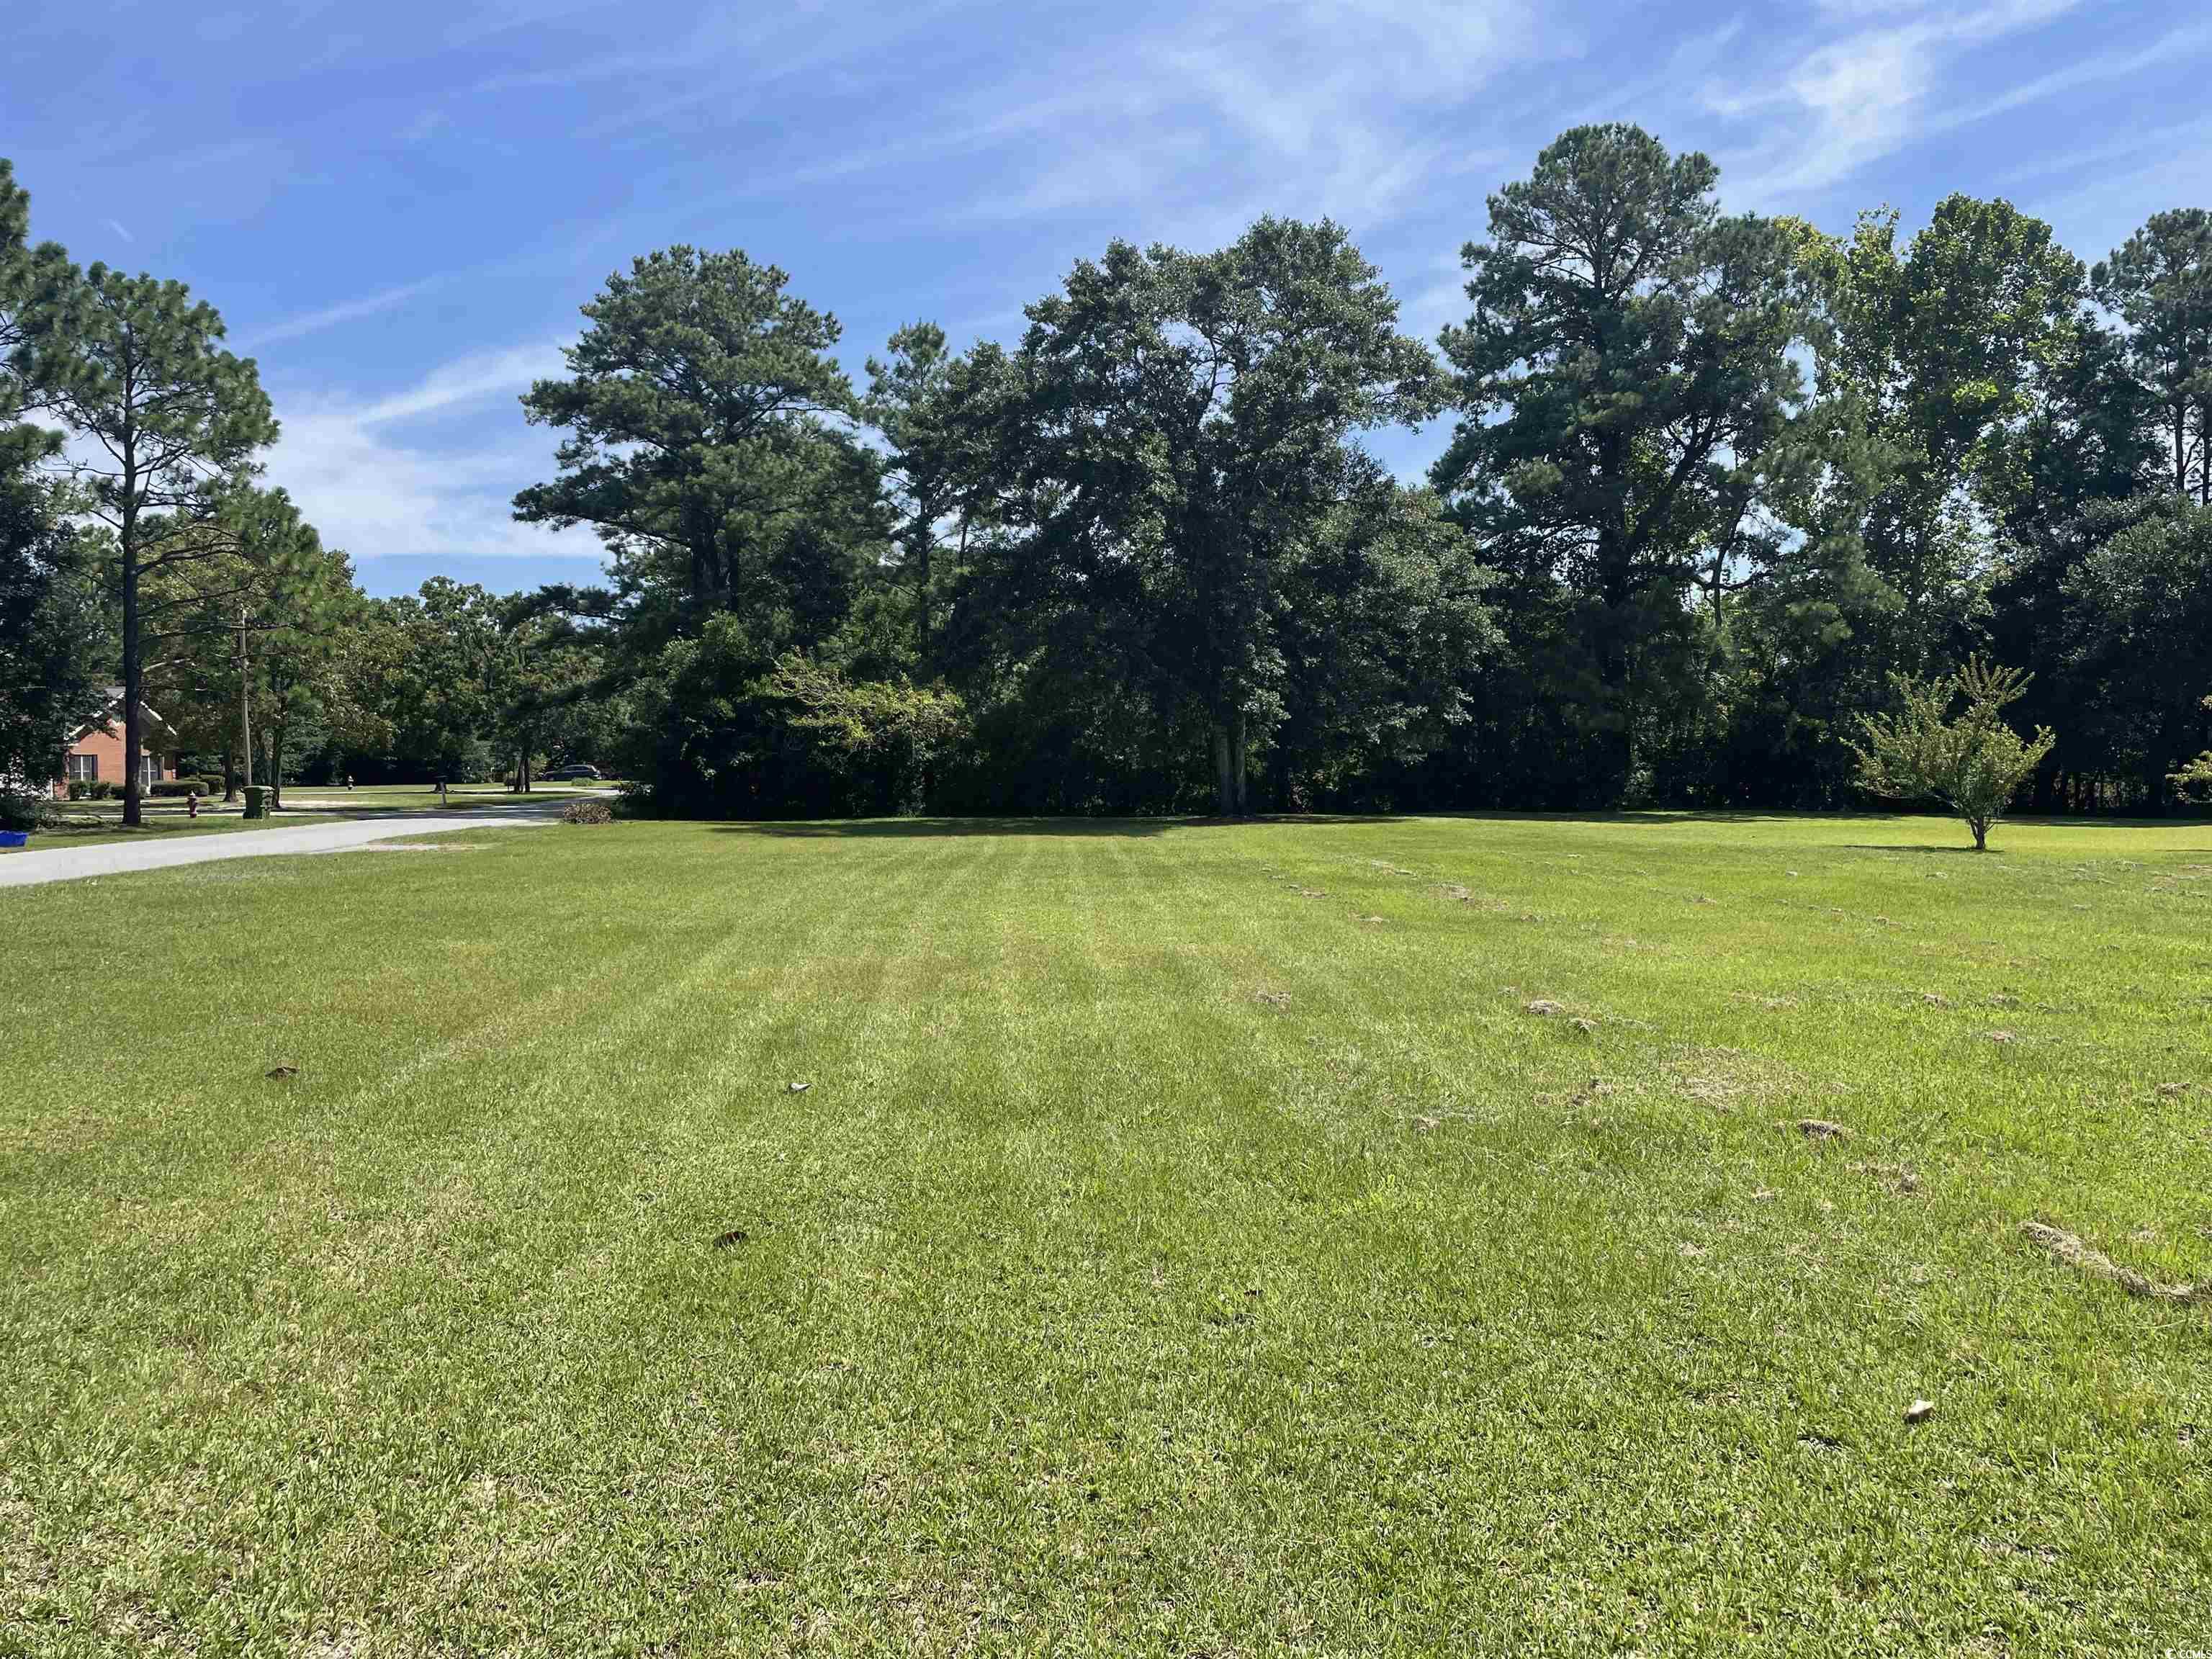 excellent lot in maryville at the corner of old charleston road and oakley street. the lot is approximately 1.6 acres. the is a pond at the rear of the property that is approximately 1 acre. the remainder of the parcel is completely cleared and level. this is an excellent home site in a great neighborhood!